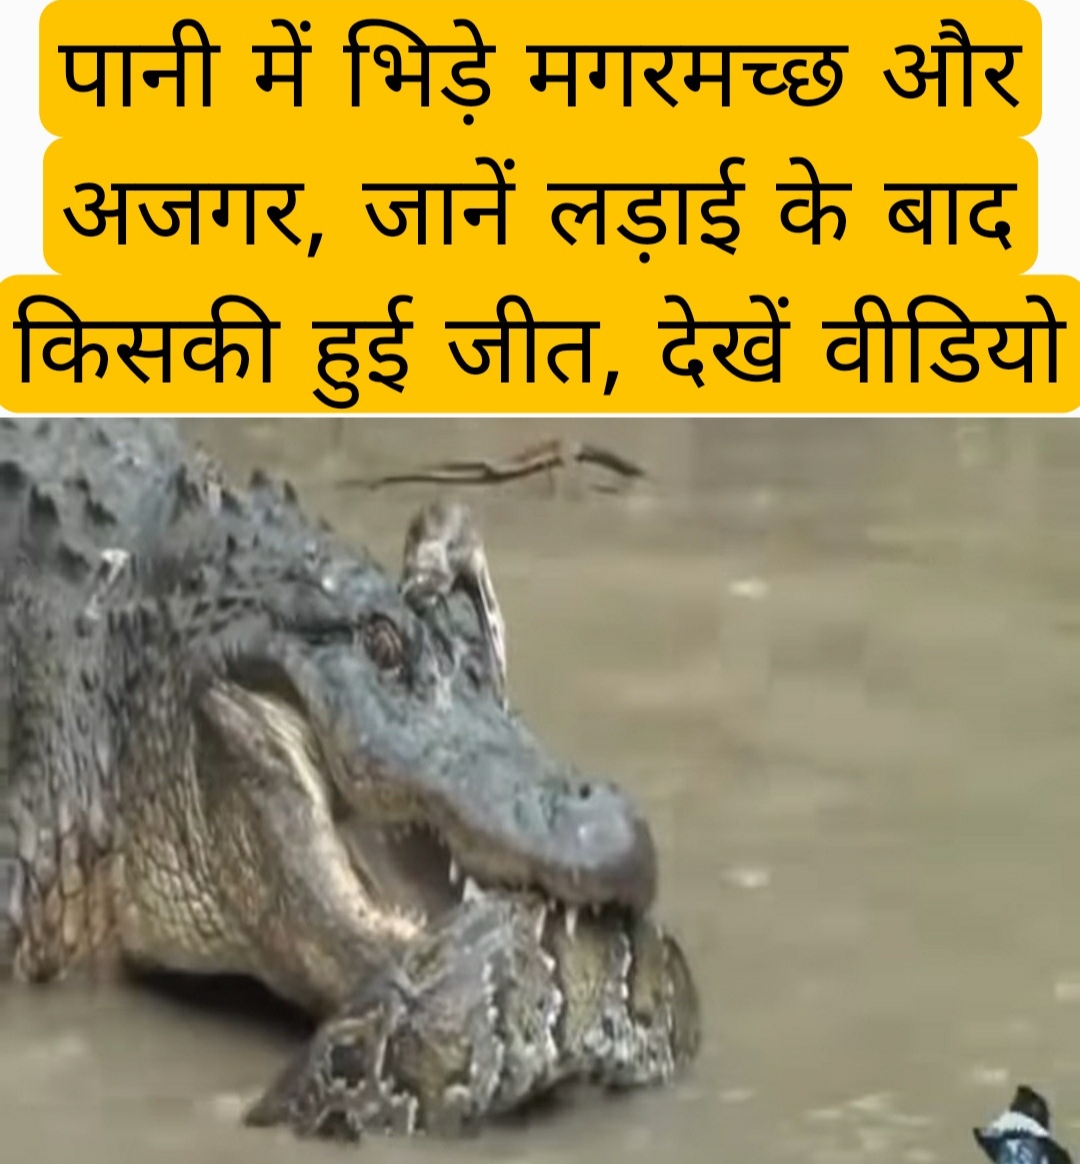 crocodile and snake fight